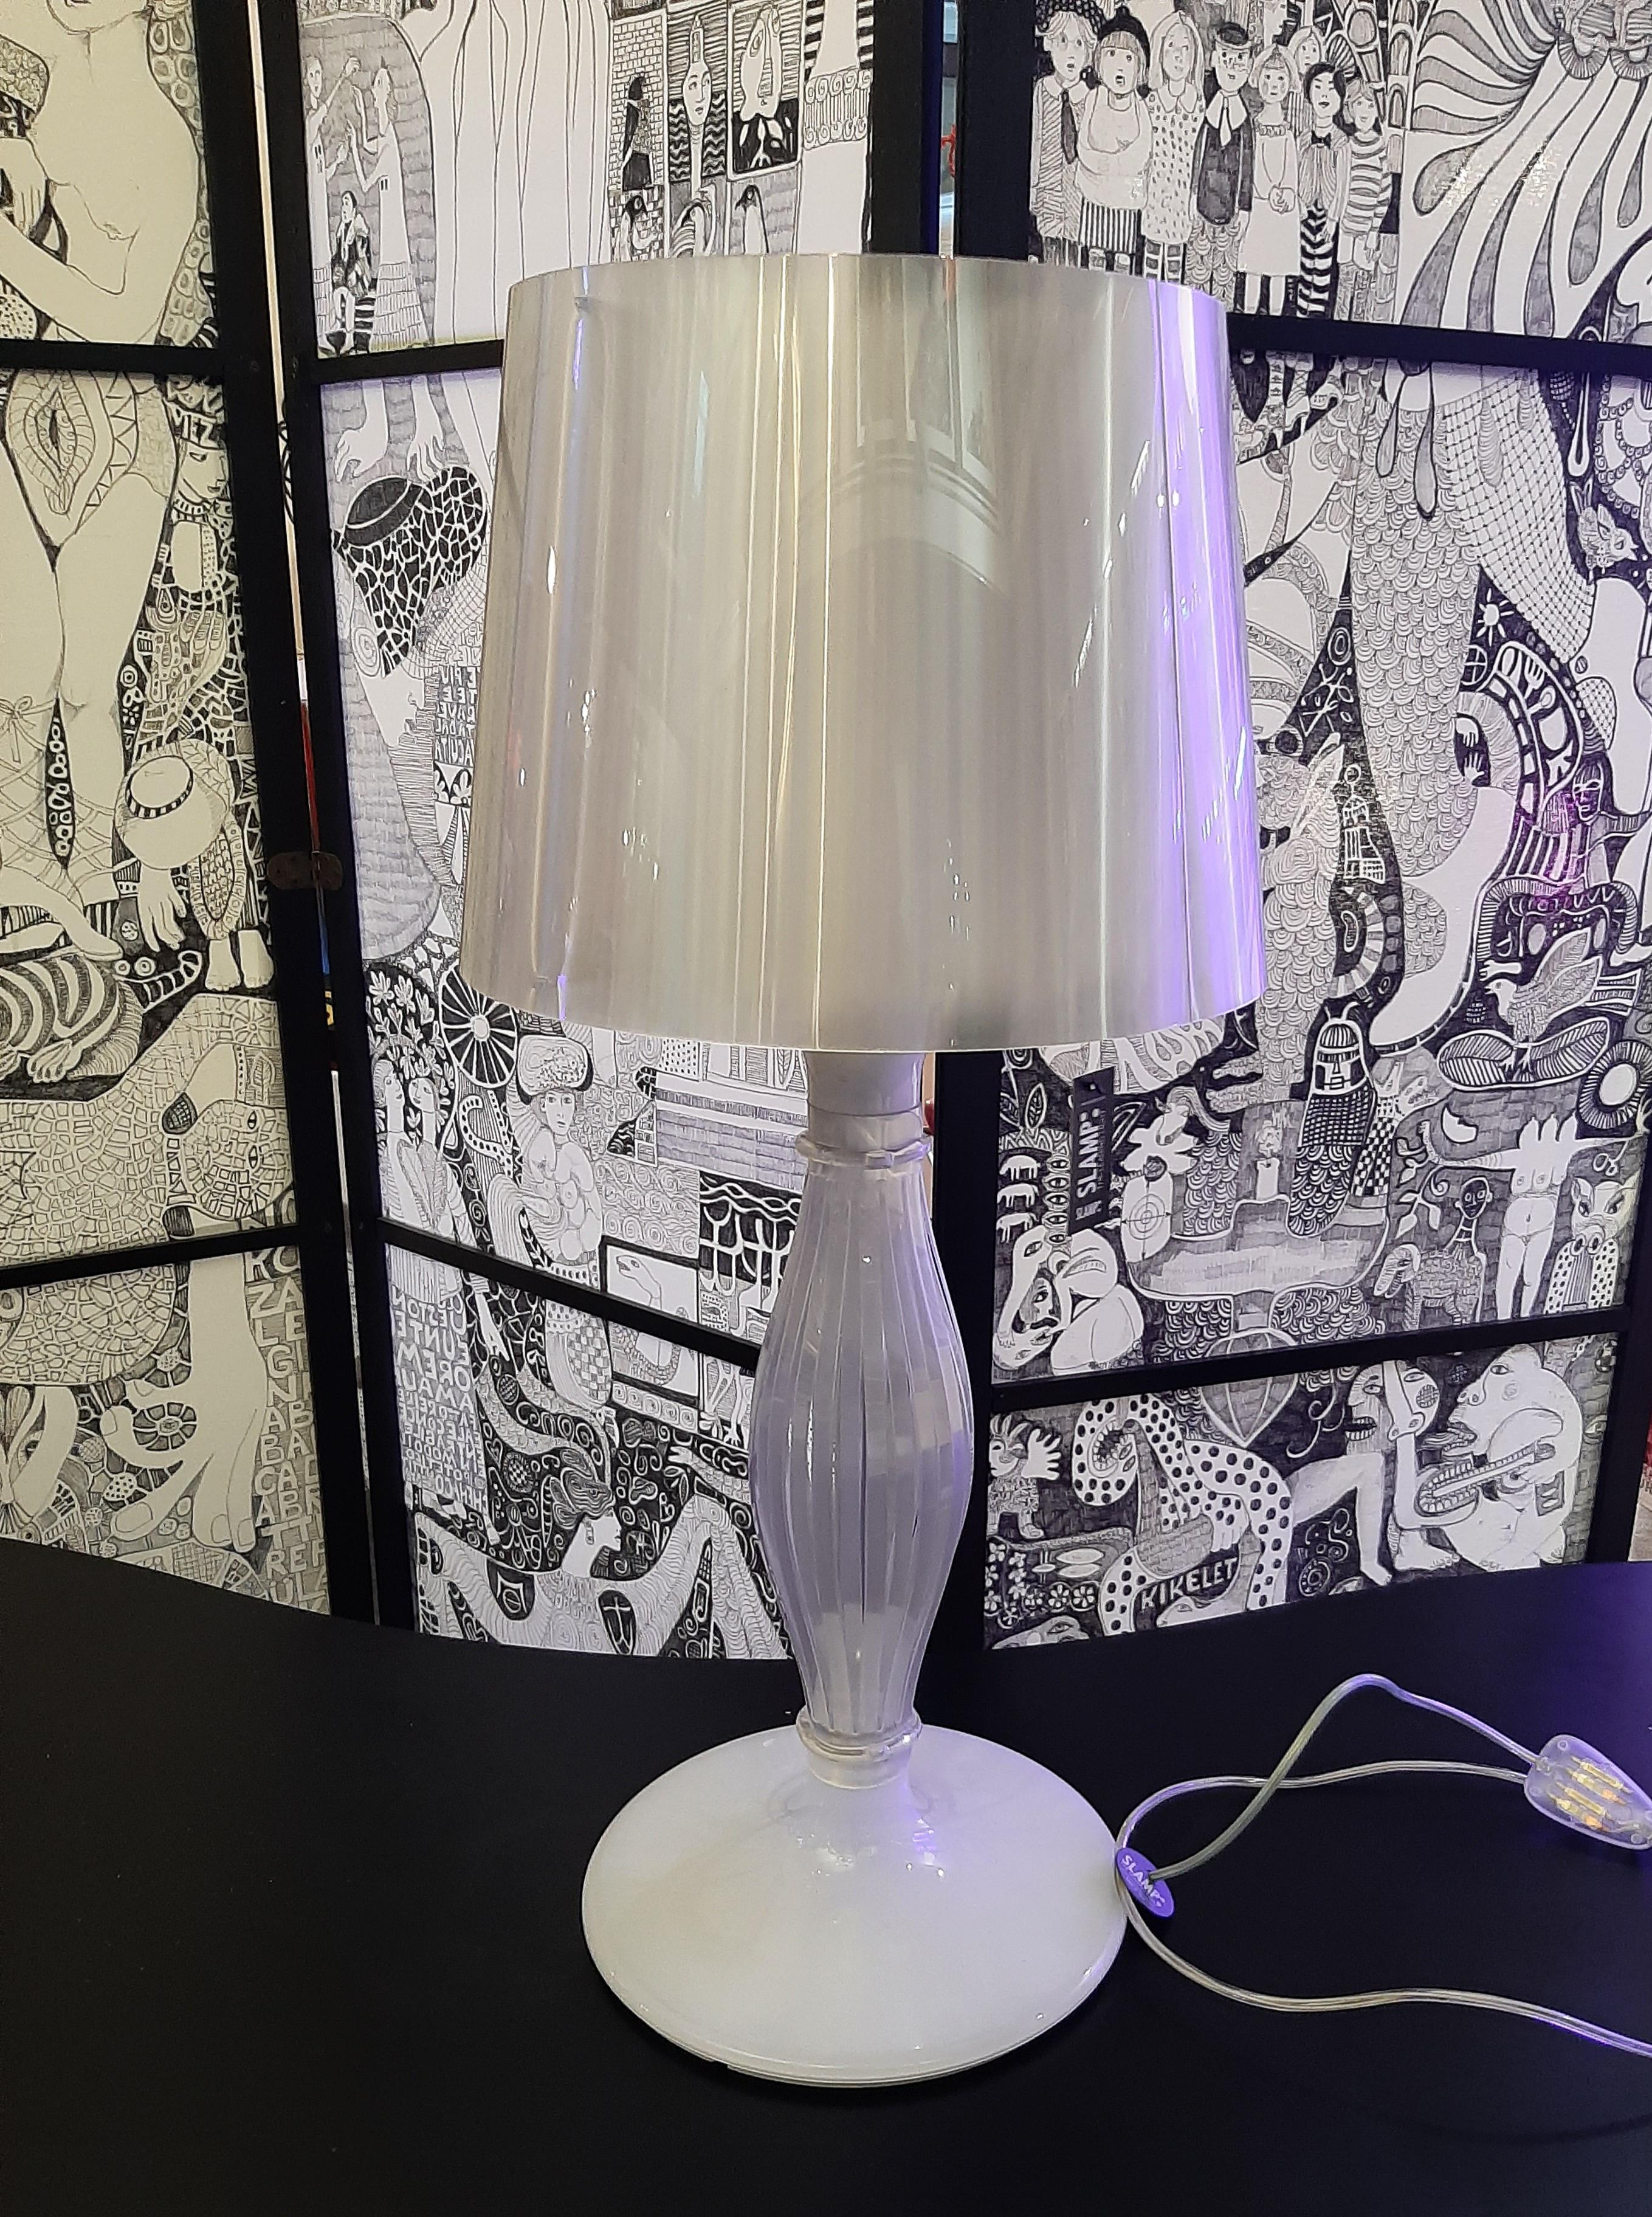 Table lamp model Liza Slamp production.
Baroque-inspired plastic table lamp that combines a design with a traditional flavor with the use of contemporary materials, technopolymers.
Designed by Elisa Giovannoni, the Liza table lamp features a dual